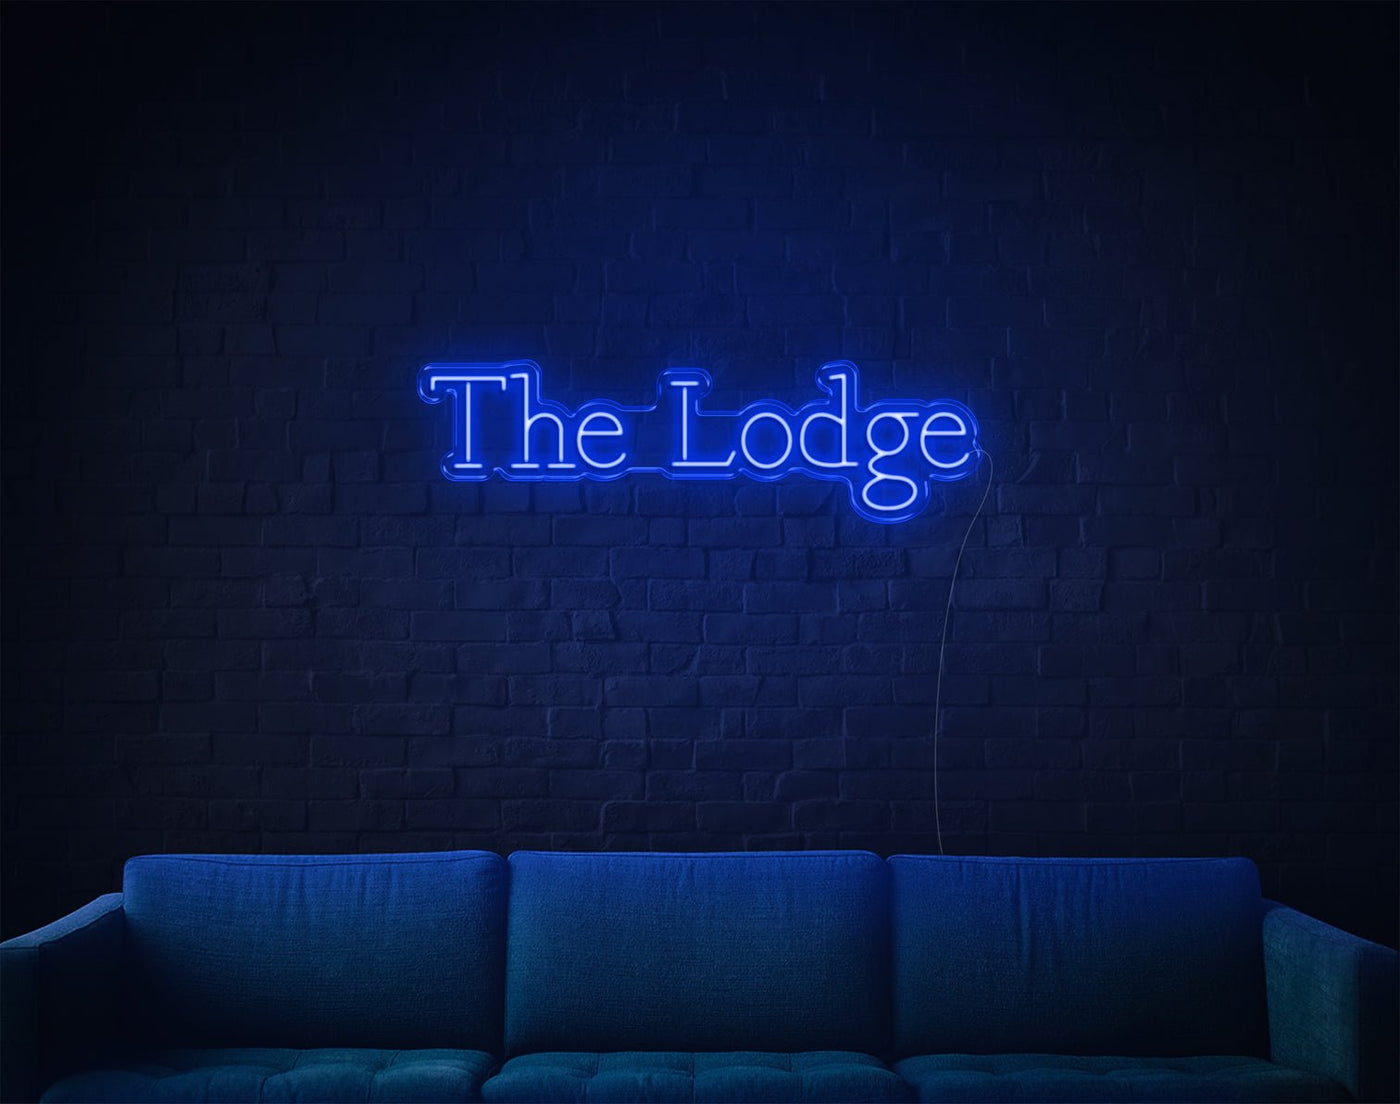 The Lodge LED Neon Sign - 11inch x 37inchBlue